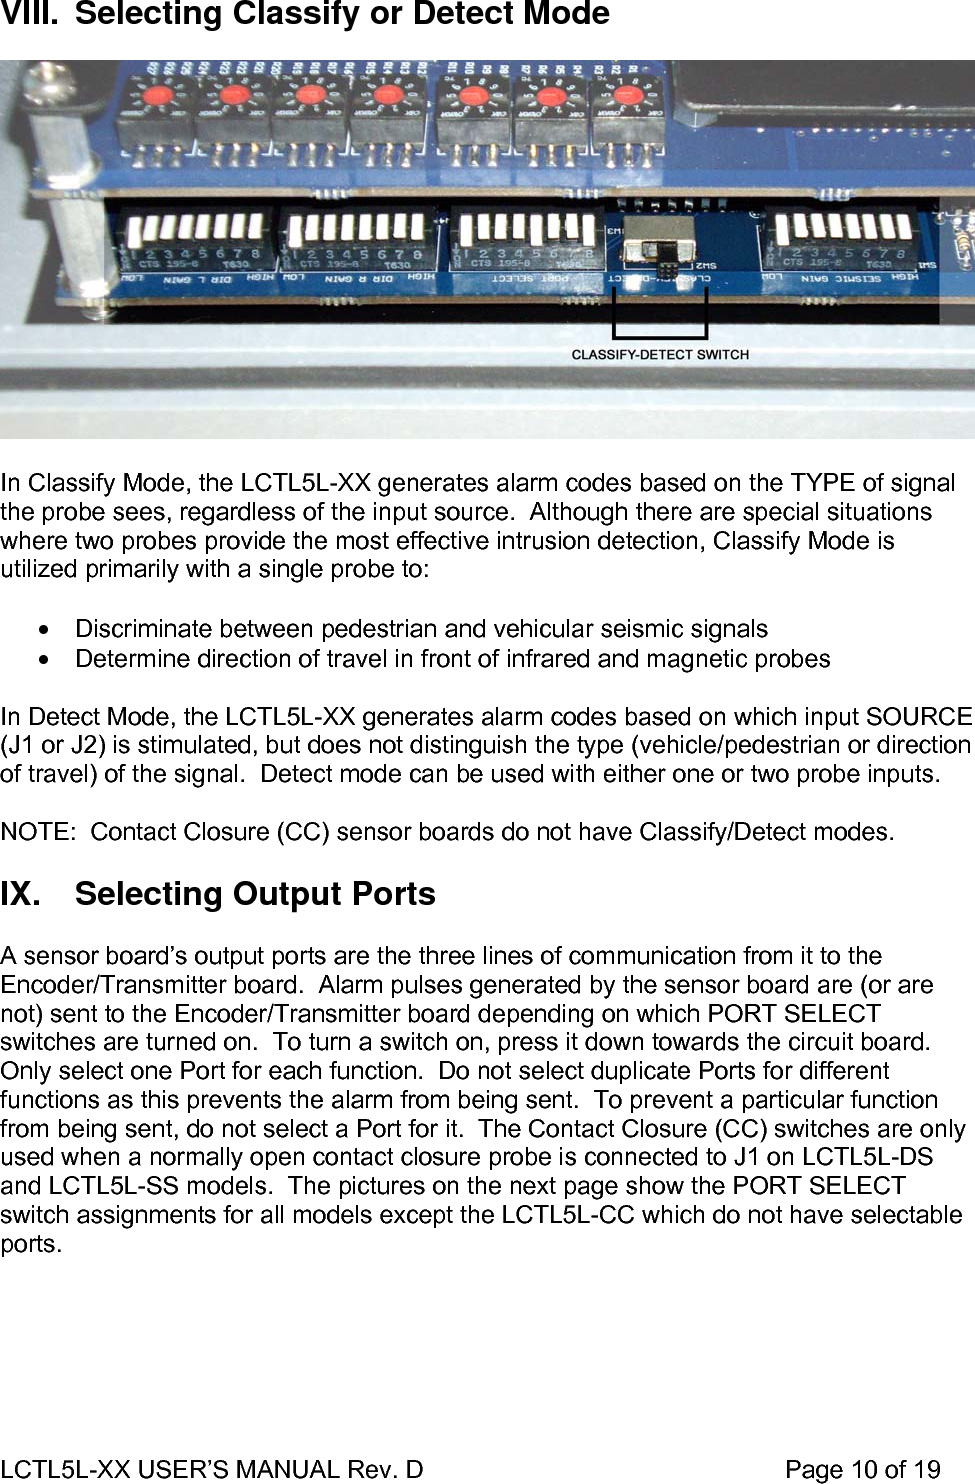 LCTL5L-XX USER’S MANUAL Rev. D                                                    Page 10 of 19  VIII.  Selecting Classify or Detect Mode    In Classify Mode, the LCTL5L-XX generates alarm codes based on the TYPE of signal the probe sees, regardless of the input source.  Although there are special situations where two probes provide the most effective intrusion detection, Classify Mode is utilized primarily with a single probe to:  •  Discriminate between pedestrian and vehicular seismic signals •  Determine direction of travel in front of infrared and magnetic probes  In Detect Mode, the LCTL5L-XX generates alarm codes based on which input SOURCE (J1 or J2) is stimulated, but does not distinguish the type (vehicle/pedestrian or direction of travel) of the signal.  Detect mode can be used with either one or two probe inputs.  NOTE:  Contact Closure (CC) sensor boards do not have Classify/Detect modes.   IX.  Selecting Output Ports  A sensor board’s output ports are the three lines of communication from it to the Encoder/Transmitter board.  Alarm pulses generated by the sensor board are (or are not) sent to the Encoder/Transmitter board depending on which PORT SELECT switches are turned on.  To turn a switch on, press it down towards the circuit board.  Only select one Port for each function.  Do not select duplicate Ports for different functions as this prevents the alarm from being sent.  To prevent a particular function from being sent, do not select a Port for it.  The Contact Closure (CC) switches are only used when a normally open contact closure probe is connected to J1 on LCTL5L-DS and LCTL5L-SS models.  The pictures on the next page show the PORT SELECT switch assignments for all models except the LCTL5L-CC which do not have selectable ports.  